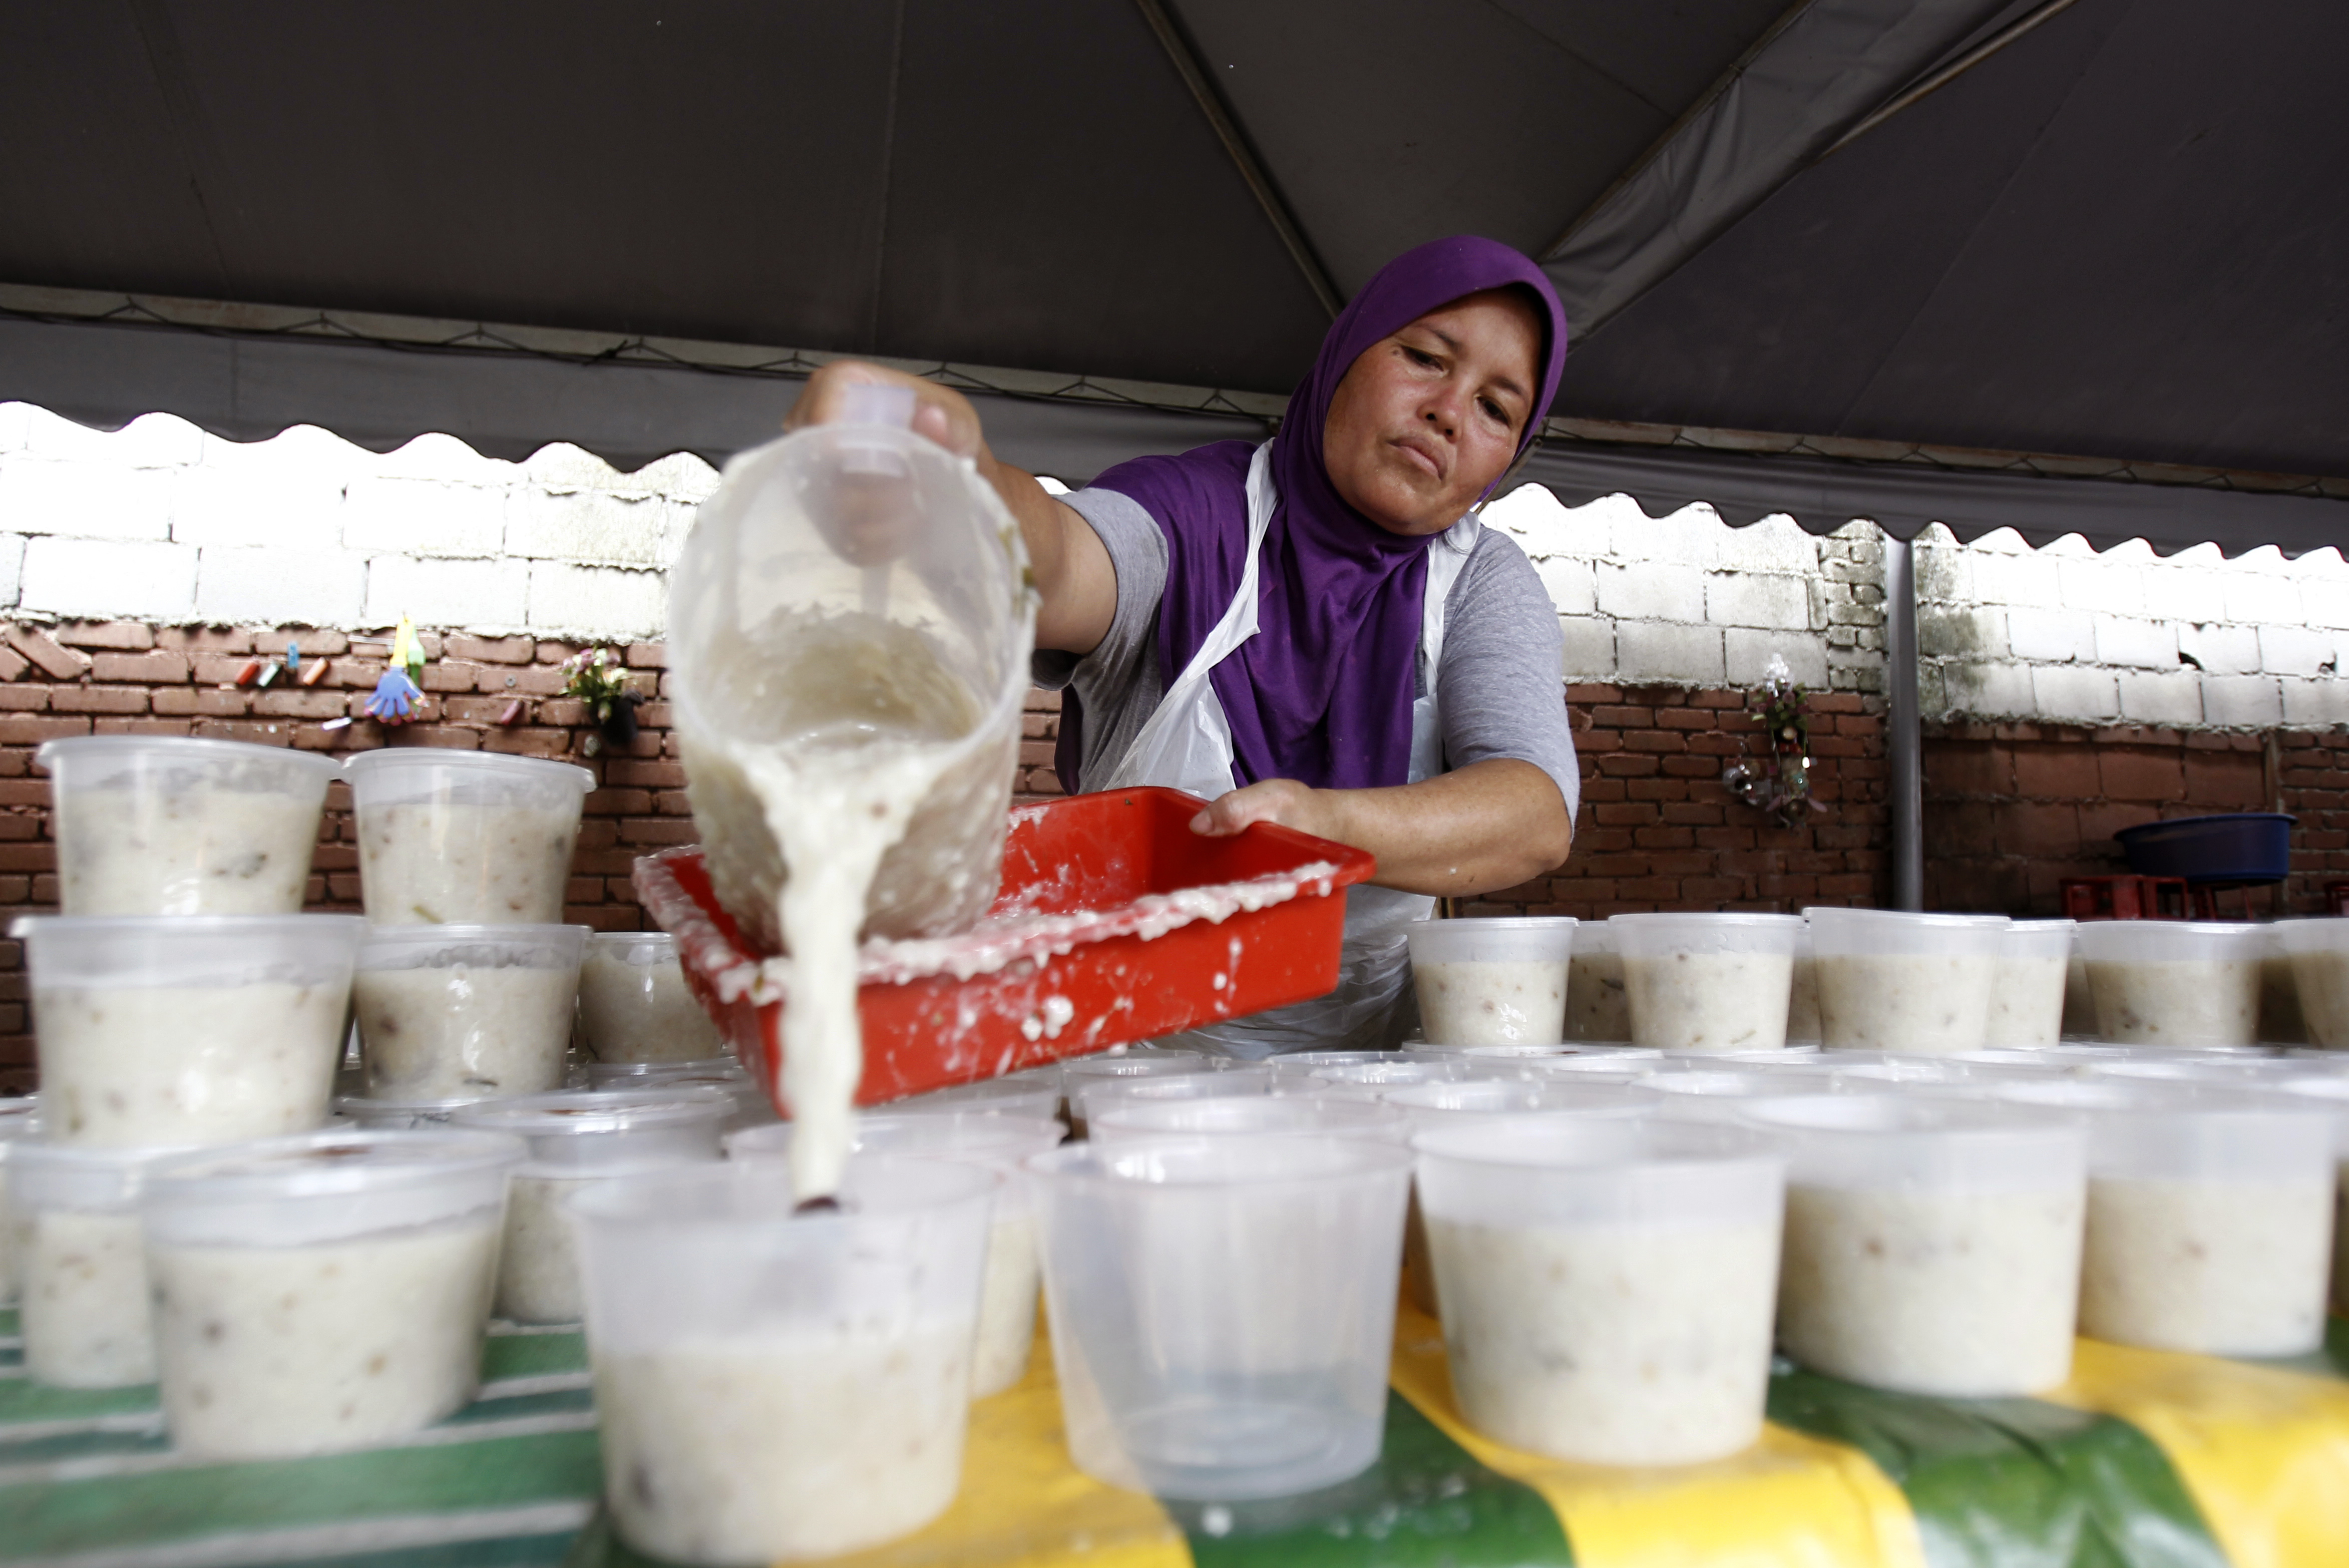 A woman pours Bubur Lambuk porridge into containers at the Kampung Baru village in Kuala Lumpur, Malaysia on Thursday, June 1, 2017. Bubur Lambuk is a type of Malay rice porridge that is cooked and distributed in many places during the fasting month of Ramadan. (AP Photo/Daniel Chan)